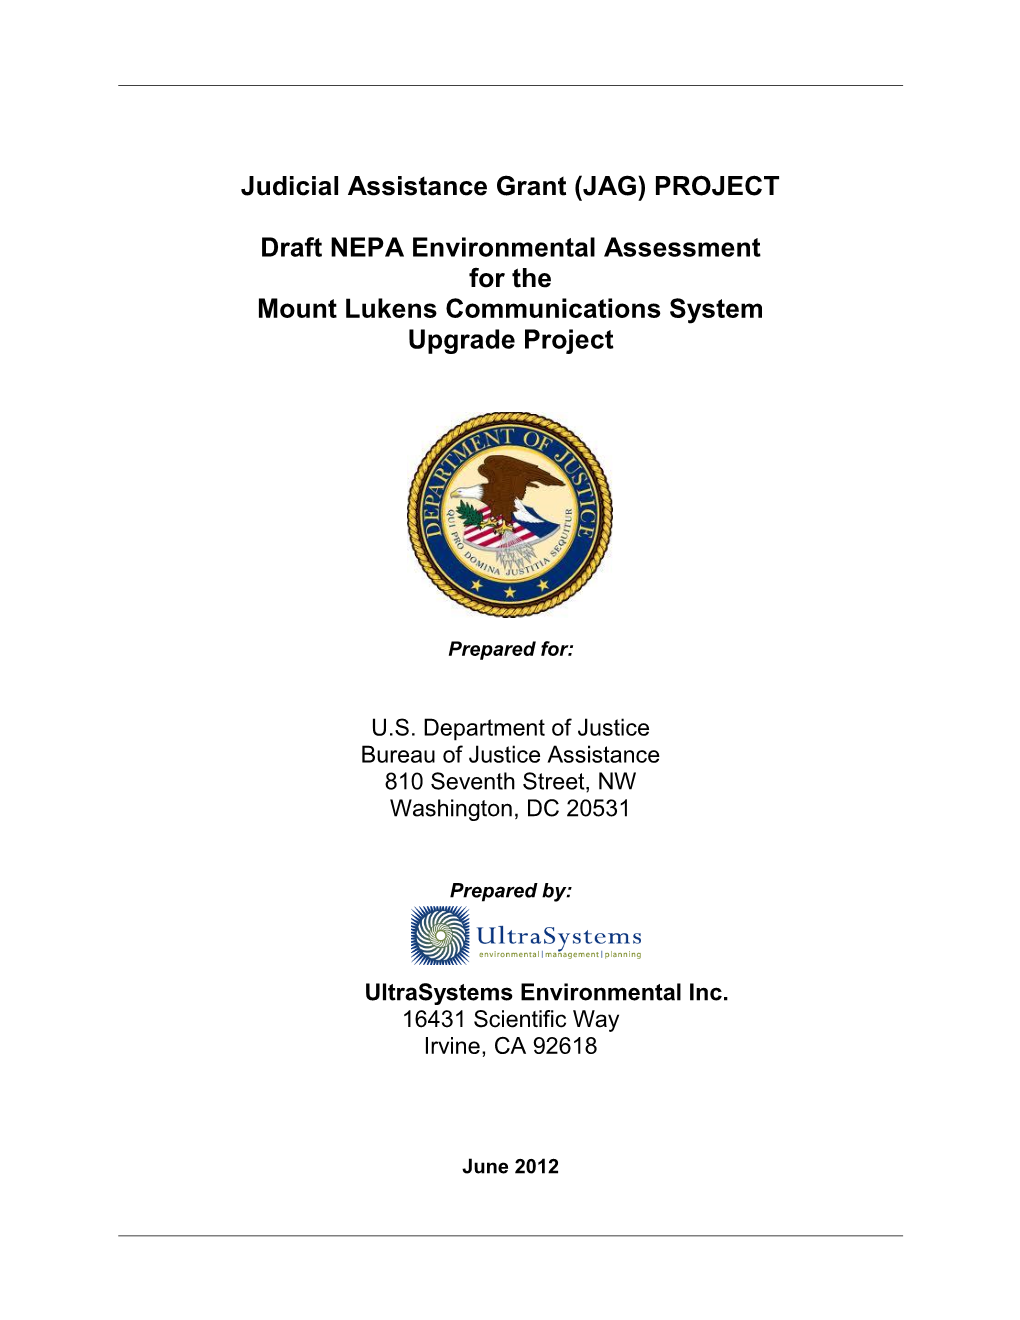 Environmental Assessment for the Mount Lukens Communications System Upgrade Project